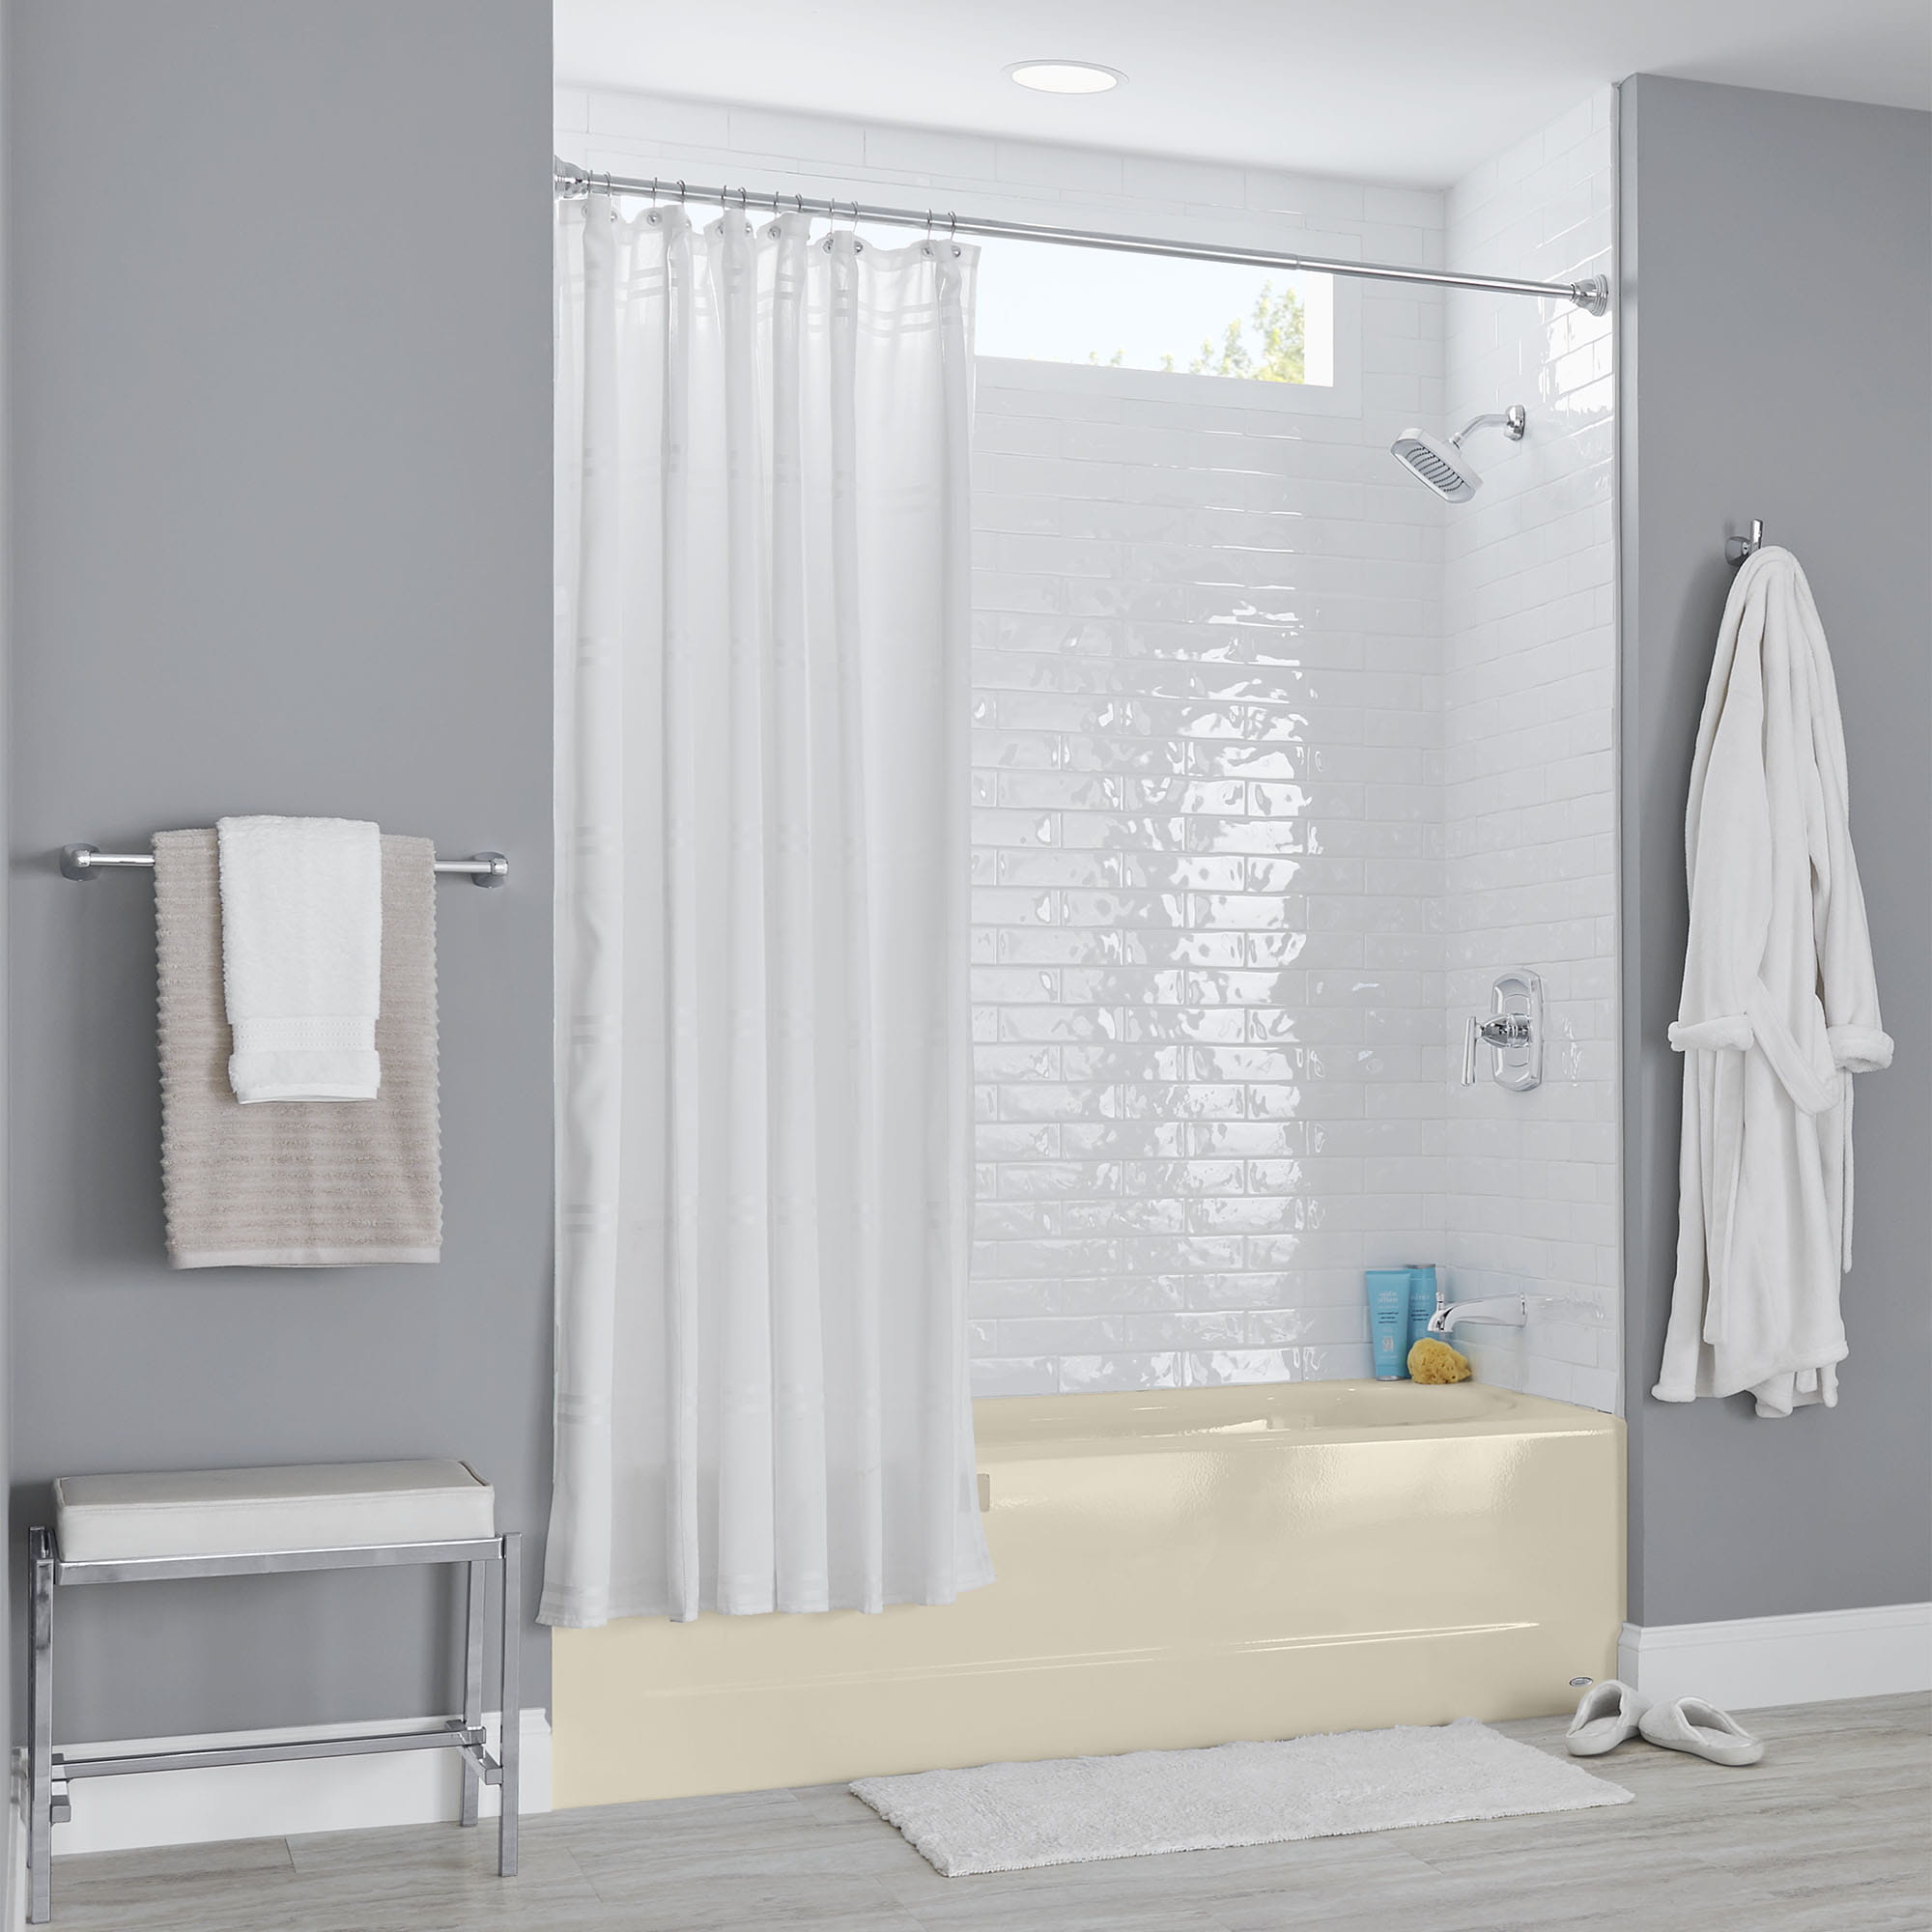 Princeton Americast 60 x 30 Inch Integral Apron Bathtub Above Floor Rough with Right Hand Outlet BONE